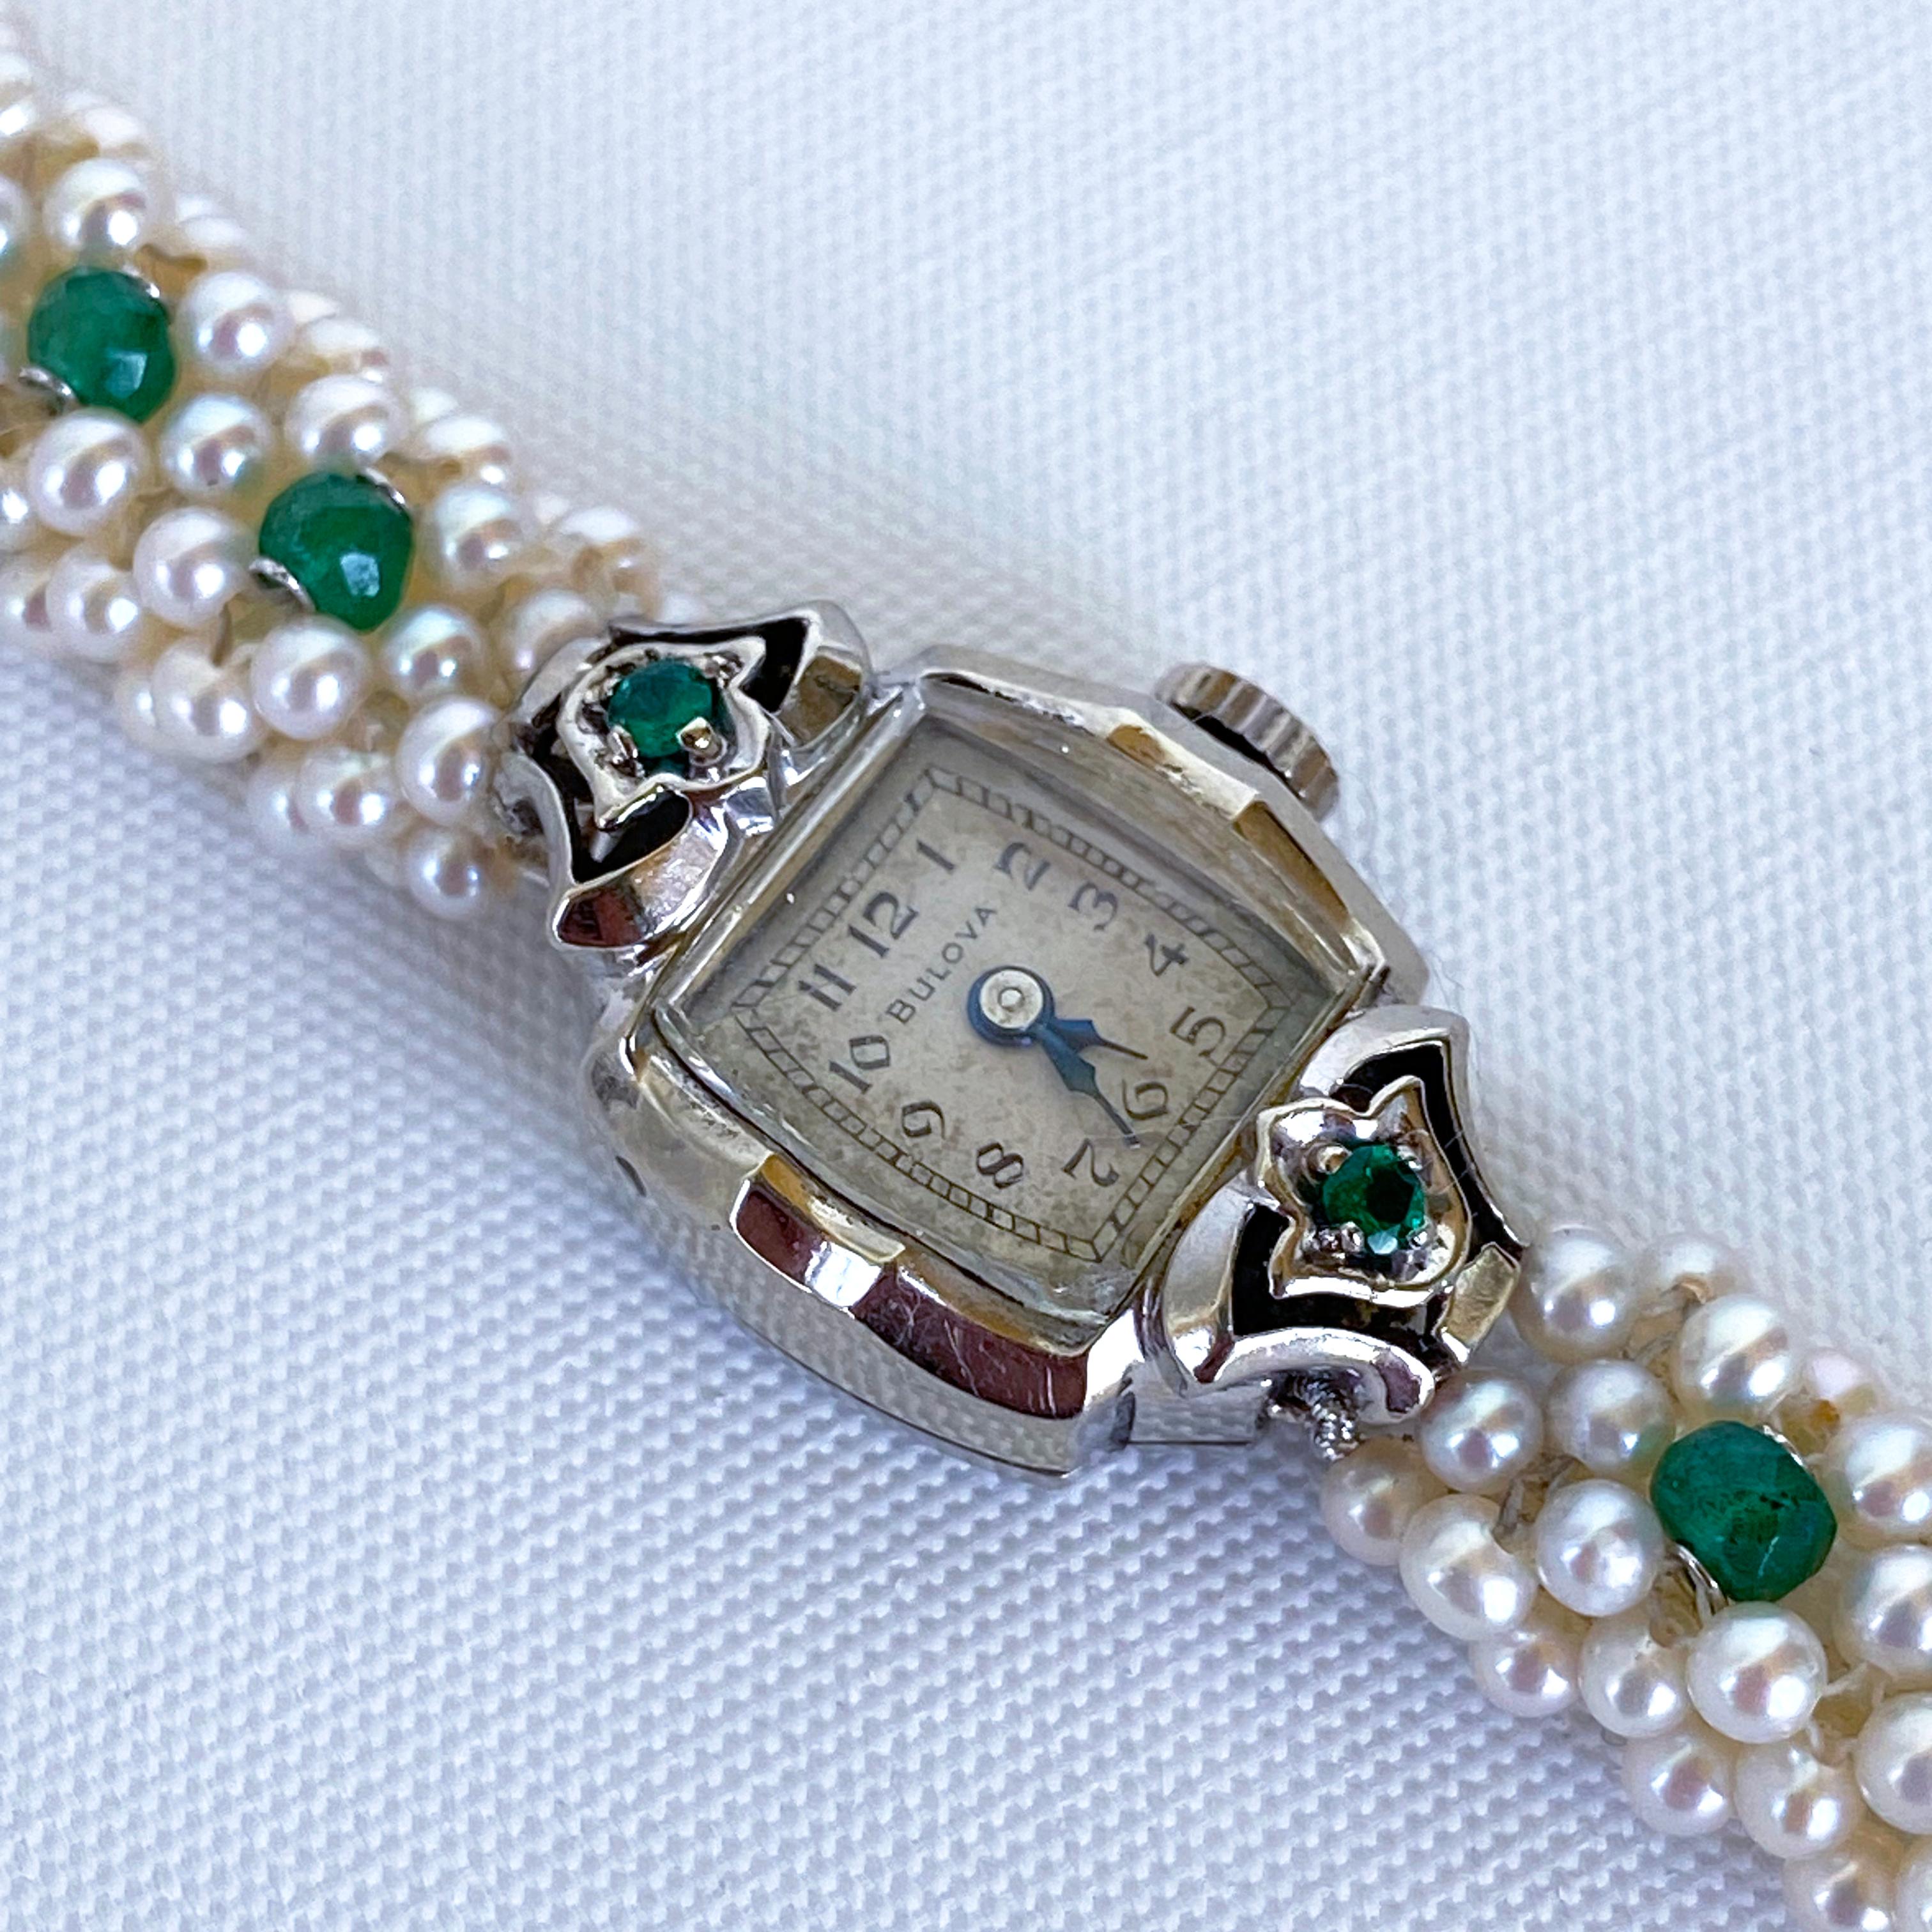 Marina J. Emerald Encrusted Vintage Watch with Pearls and 14k White Gold In New Condition For Sale In Los Angeles, CA